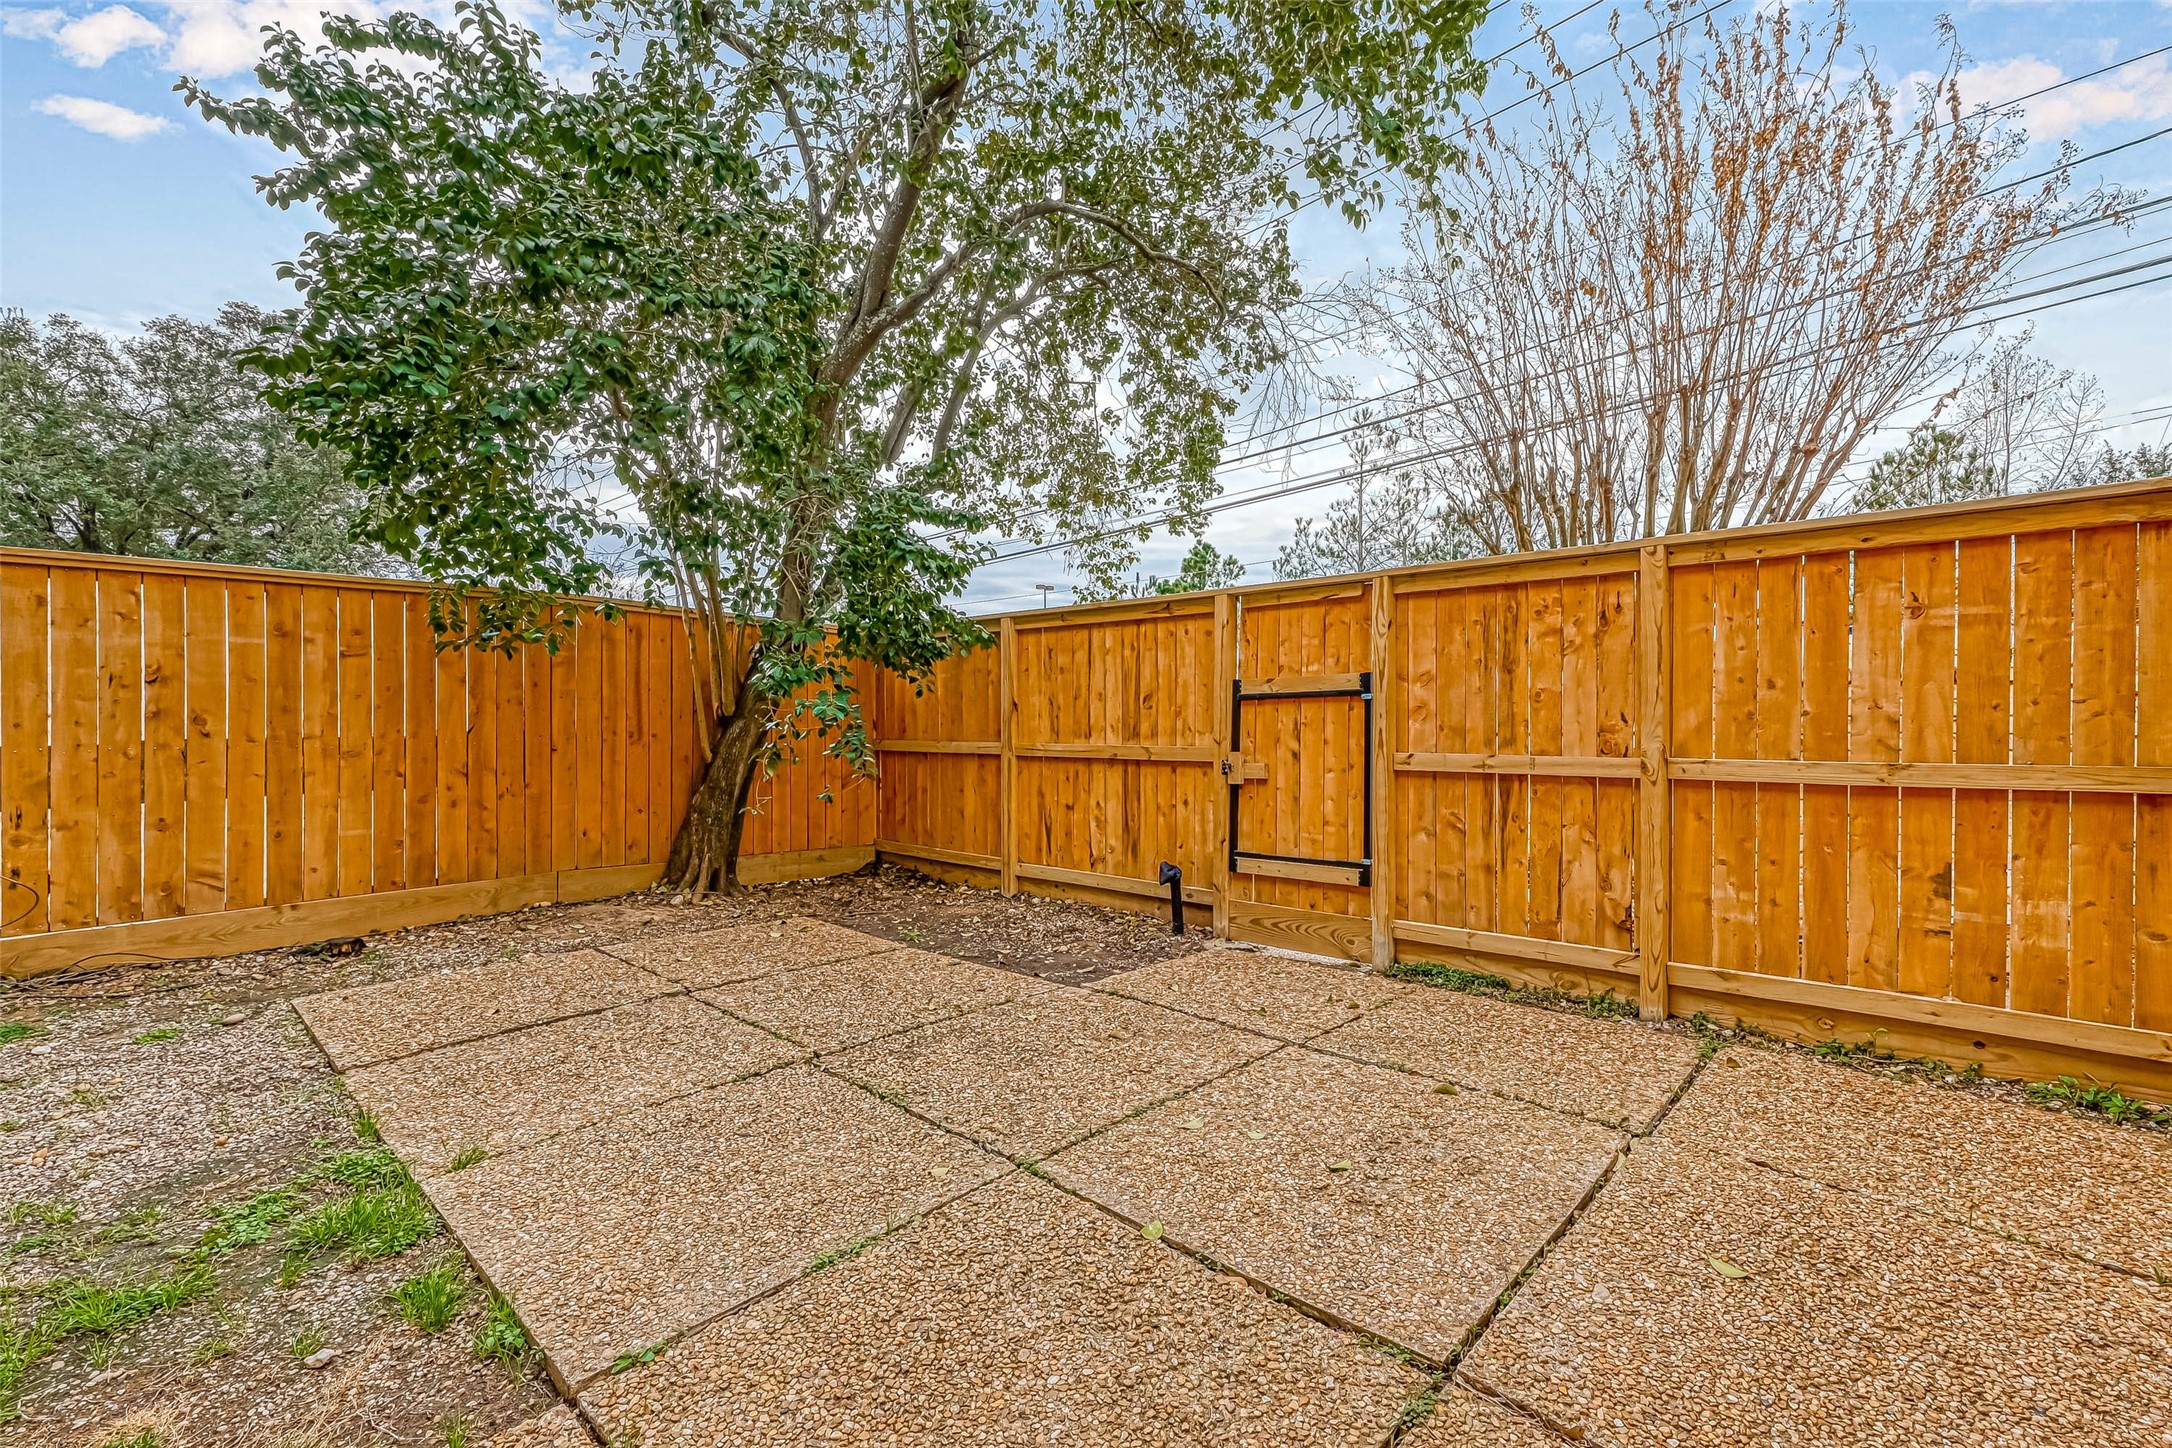 Private backyard with brand new fencing and private gate opening to Tully Road.